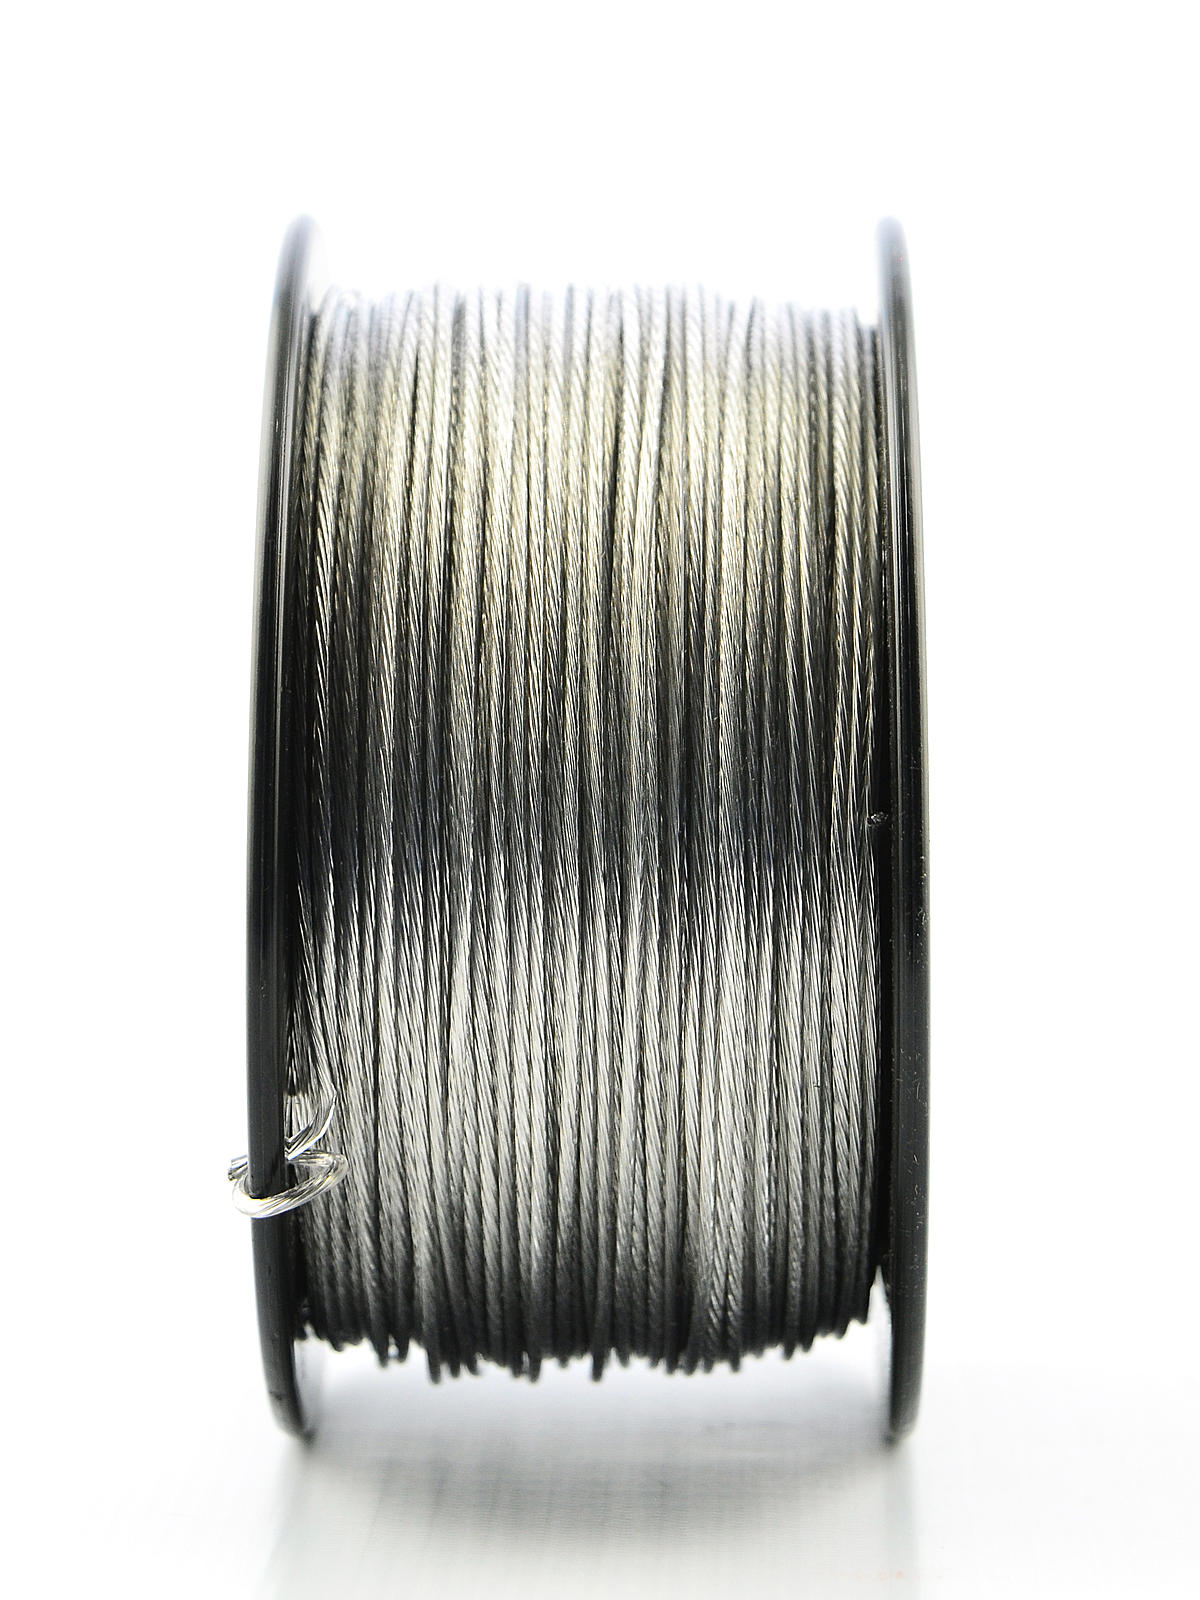 Braided Picture Wire 40 Lbs. Heavy 5 Lb. Spool